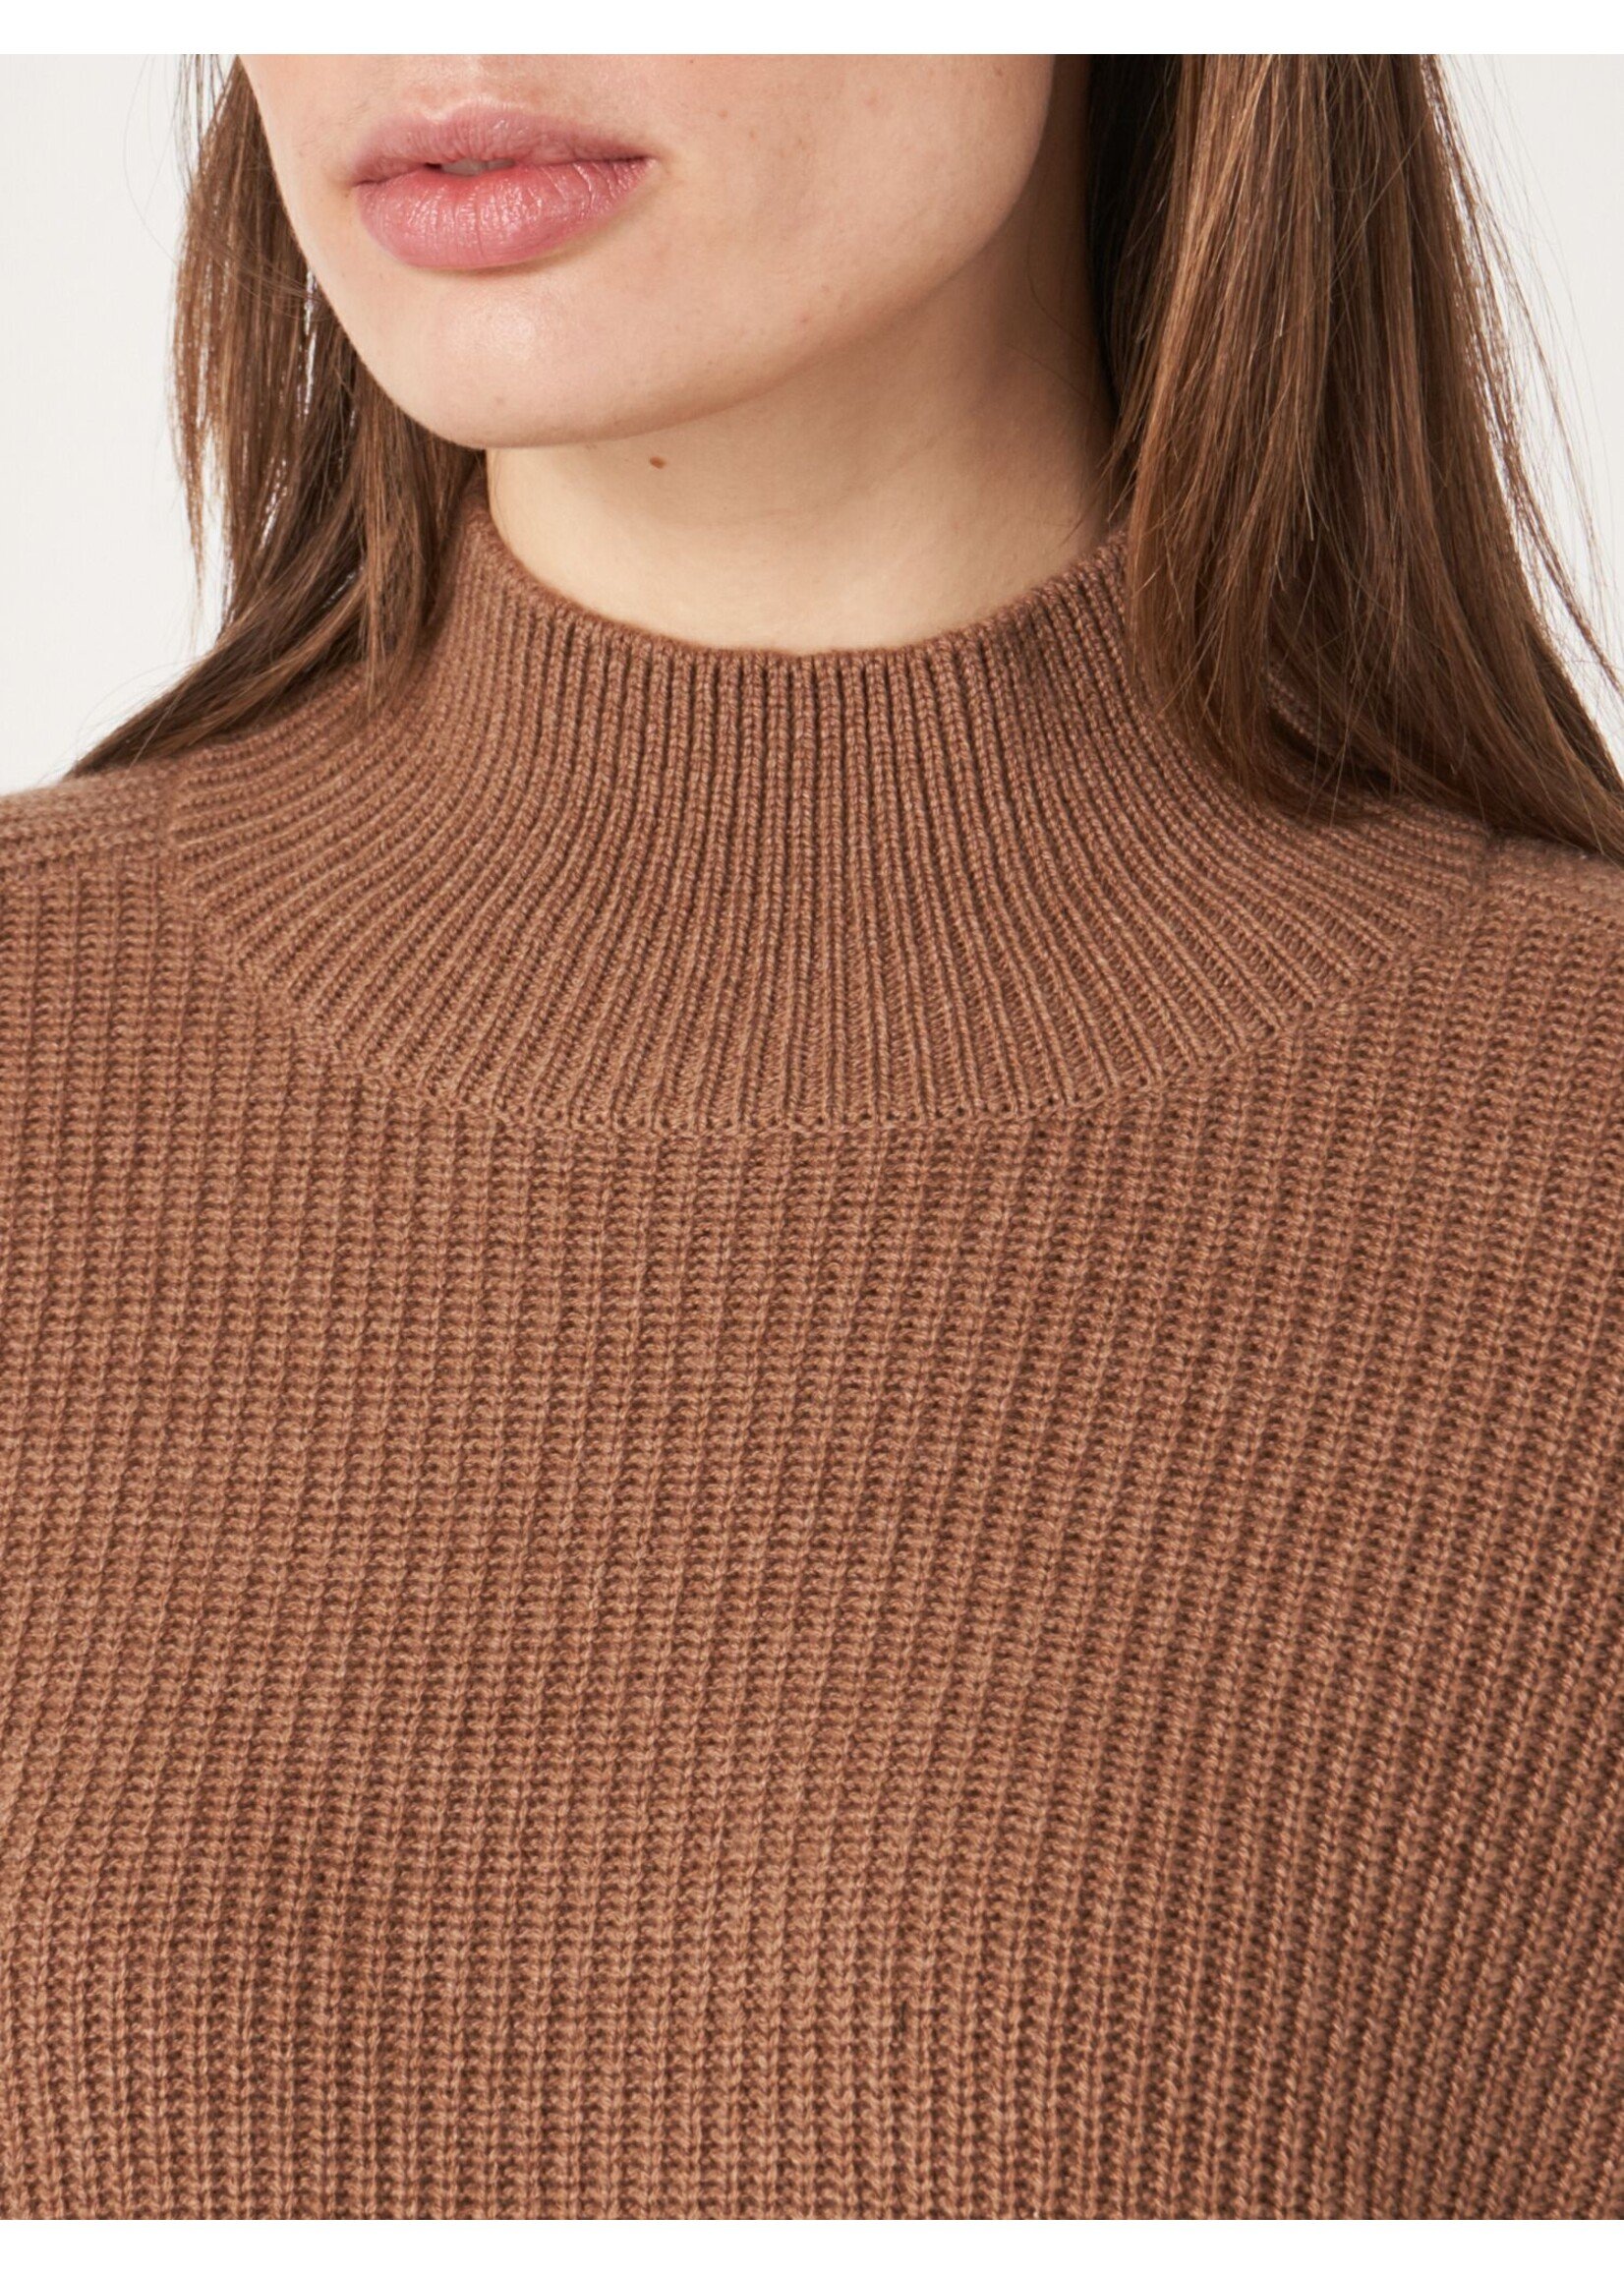 Repeat Repeat - Cashmere Knitted Pullover